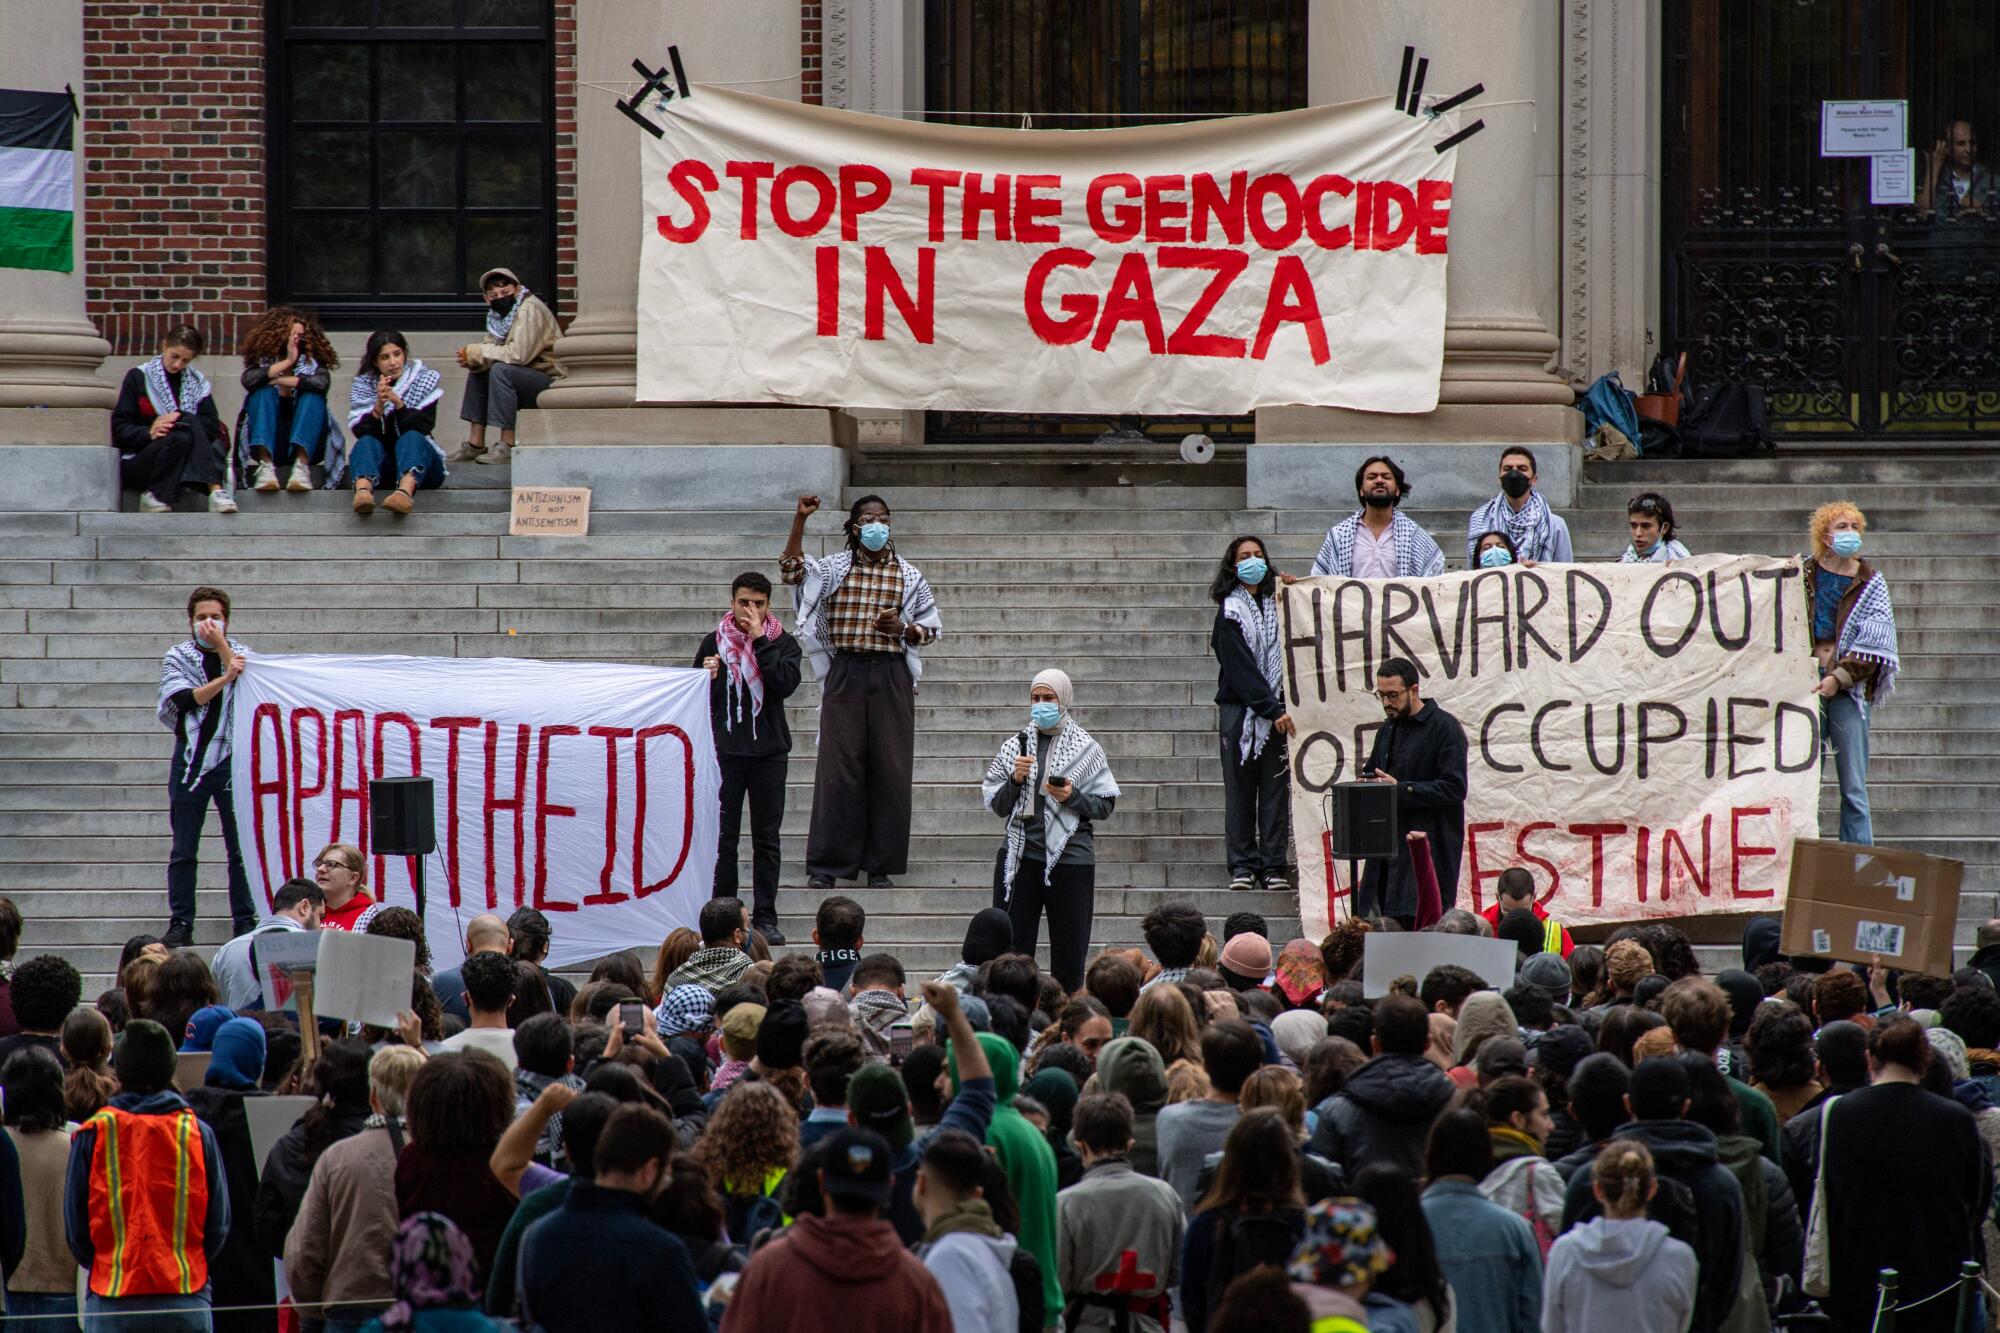 Supporters of Palestine gather at Harvard University to show their support for Palestinians in Gaza at